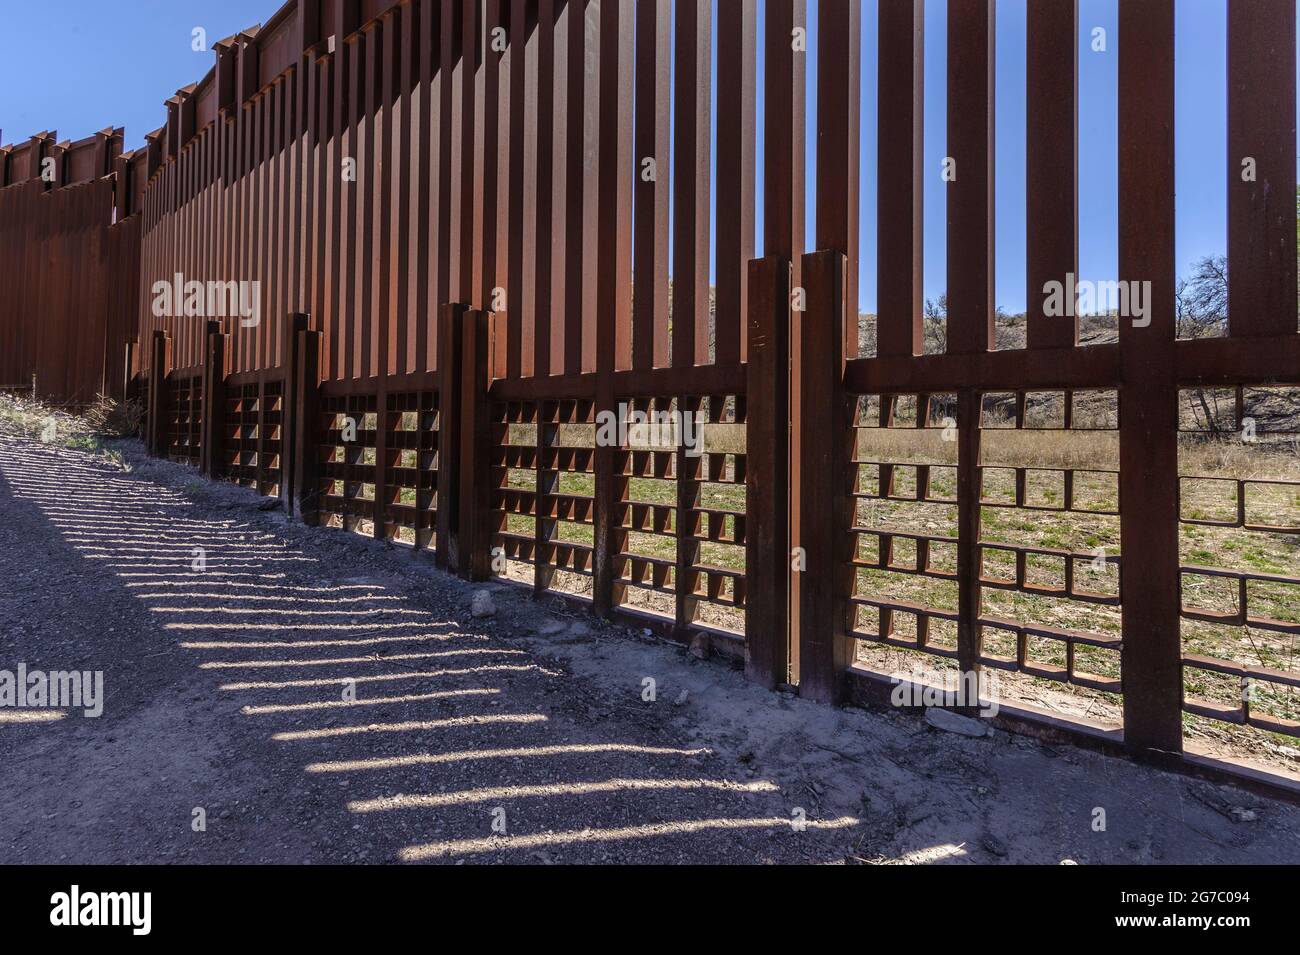 US border fence on the Mexico border, east of Nogales Arizona USA, and Nogales Sonora Mexico, viewed from US side, showing specialized structure to ac Stock Photo